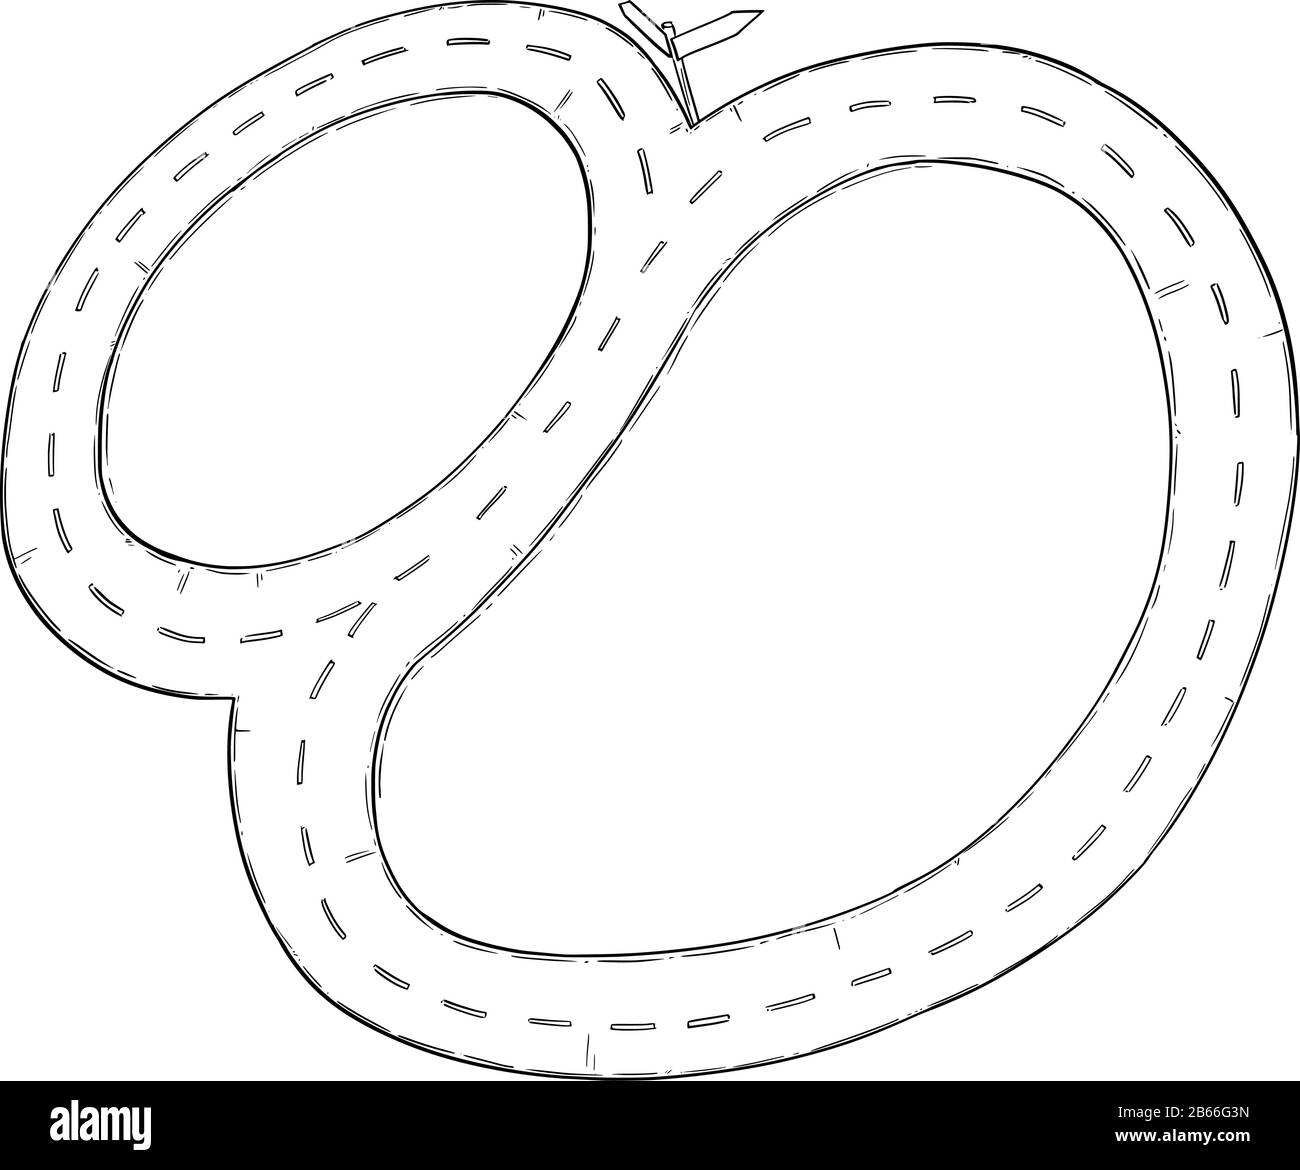 Vector black and white conceptual business drawing or illustration of fork in the road or crossroad,moving in circle, no decision or real options to choose from. Stock Vector